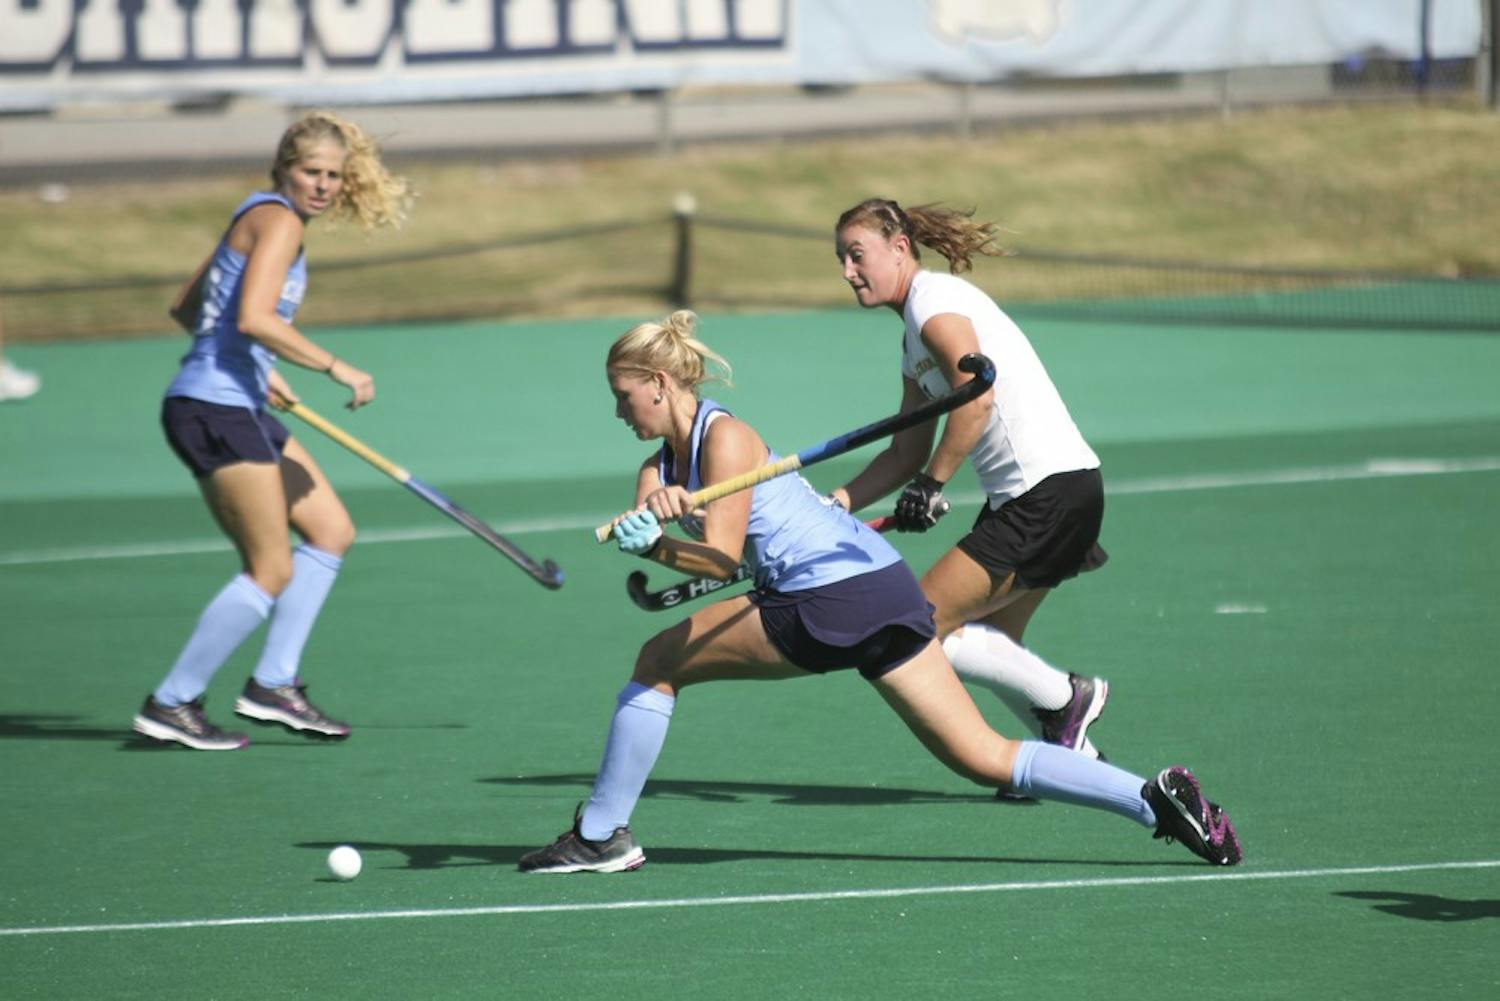 UNC midfielder Catherine Hayden (8) winds up for a shot against Appalachian State on Sunday.